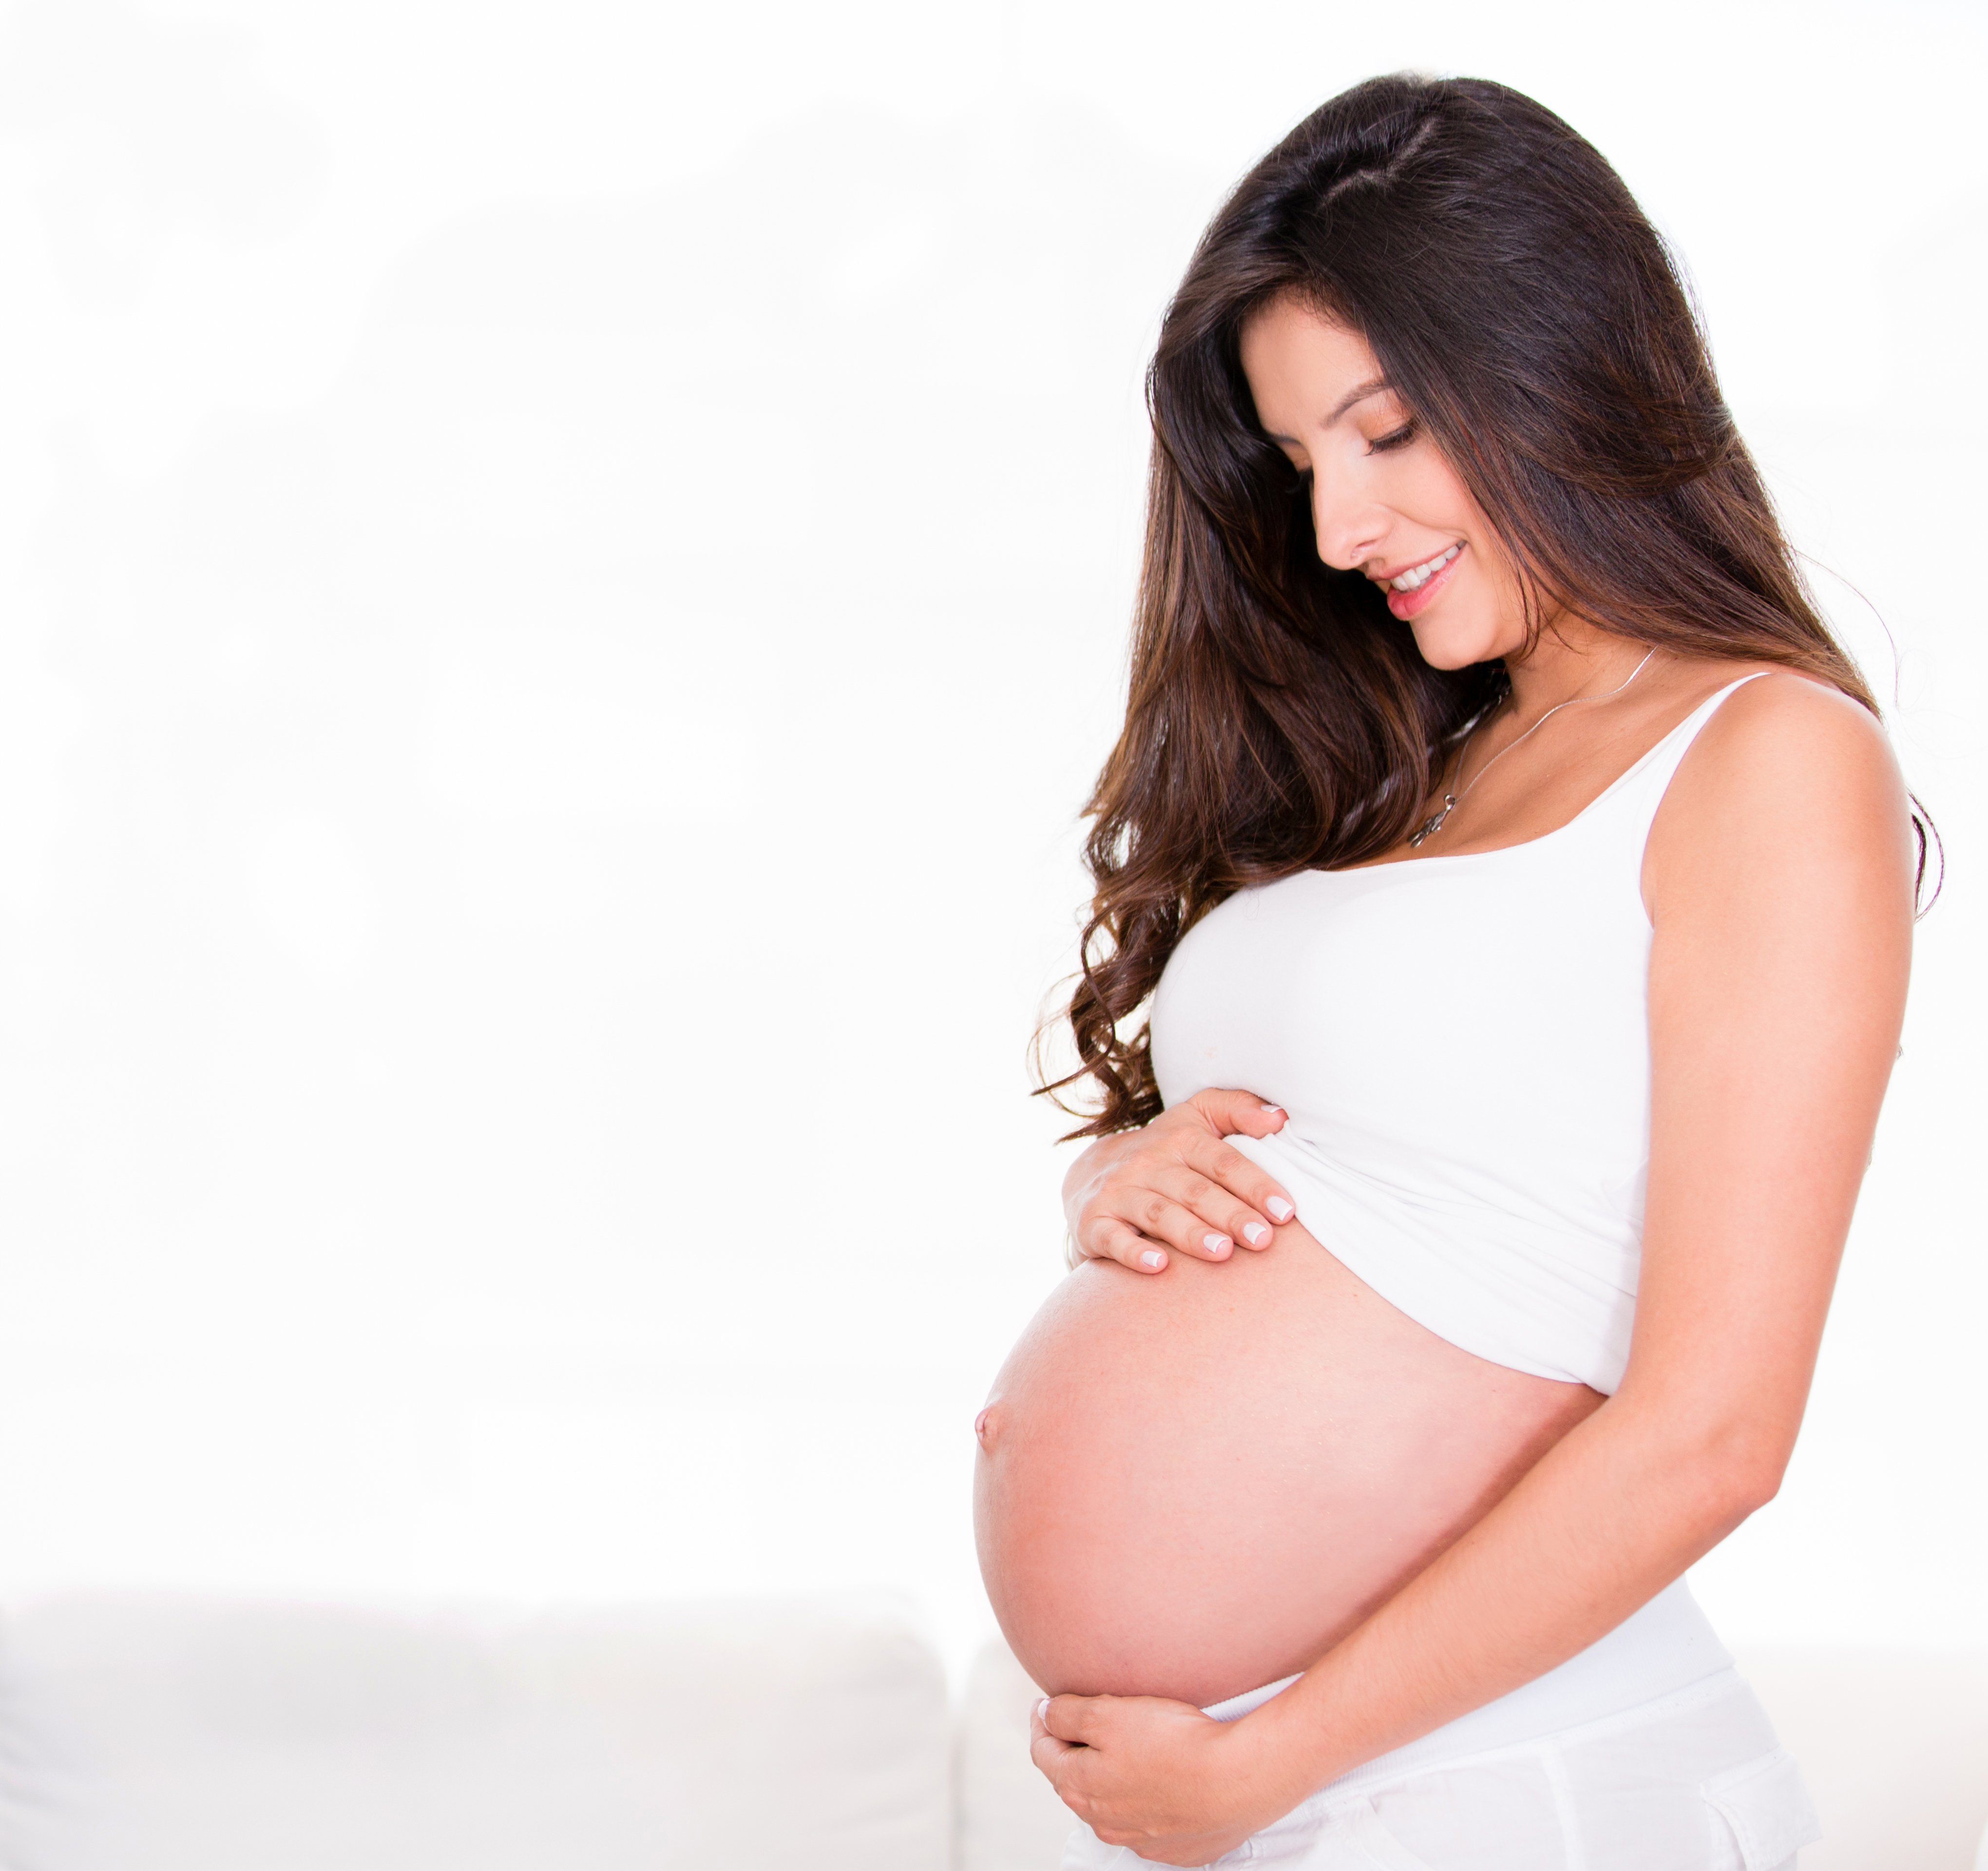 From High Heels To Hair Dye: How The Concerns Of Pregnant Women ...